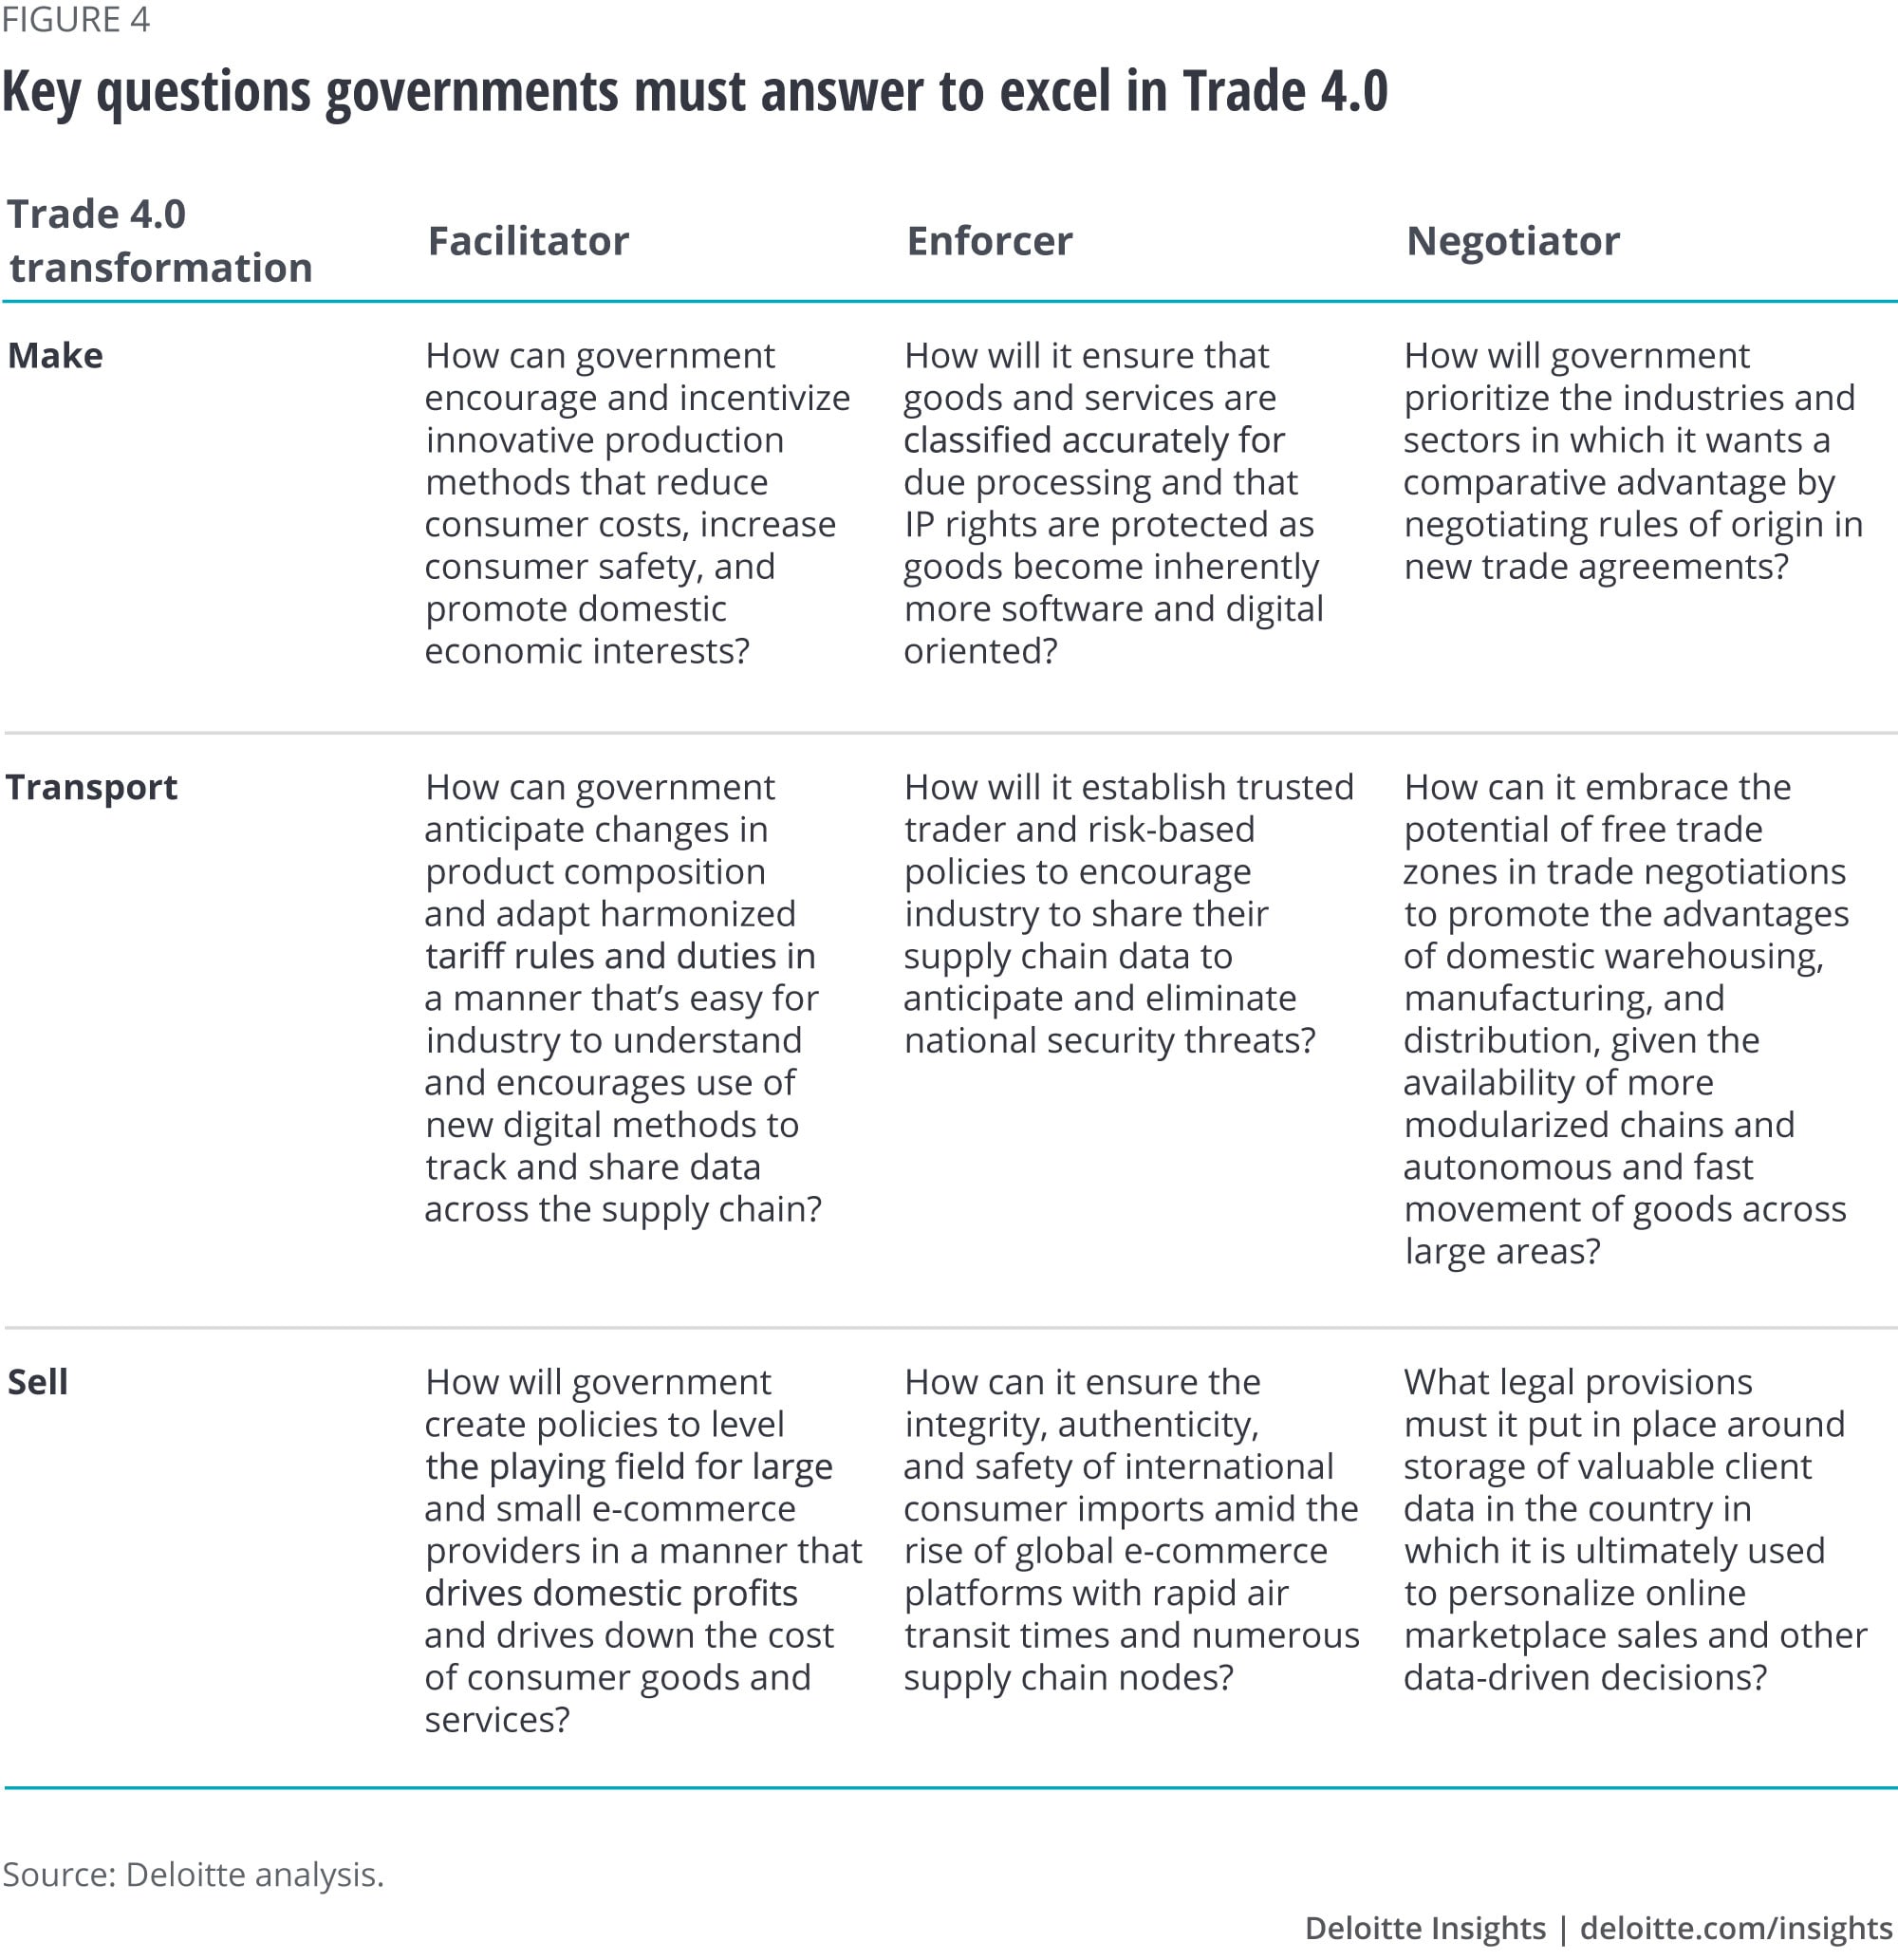 Key questions governments should answer to help excel in Trade 4.0